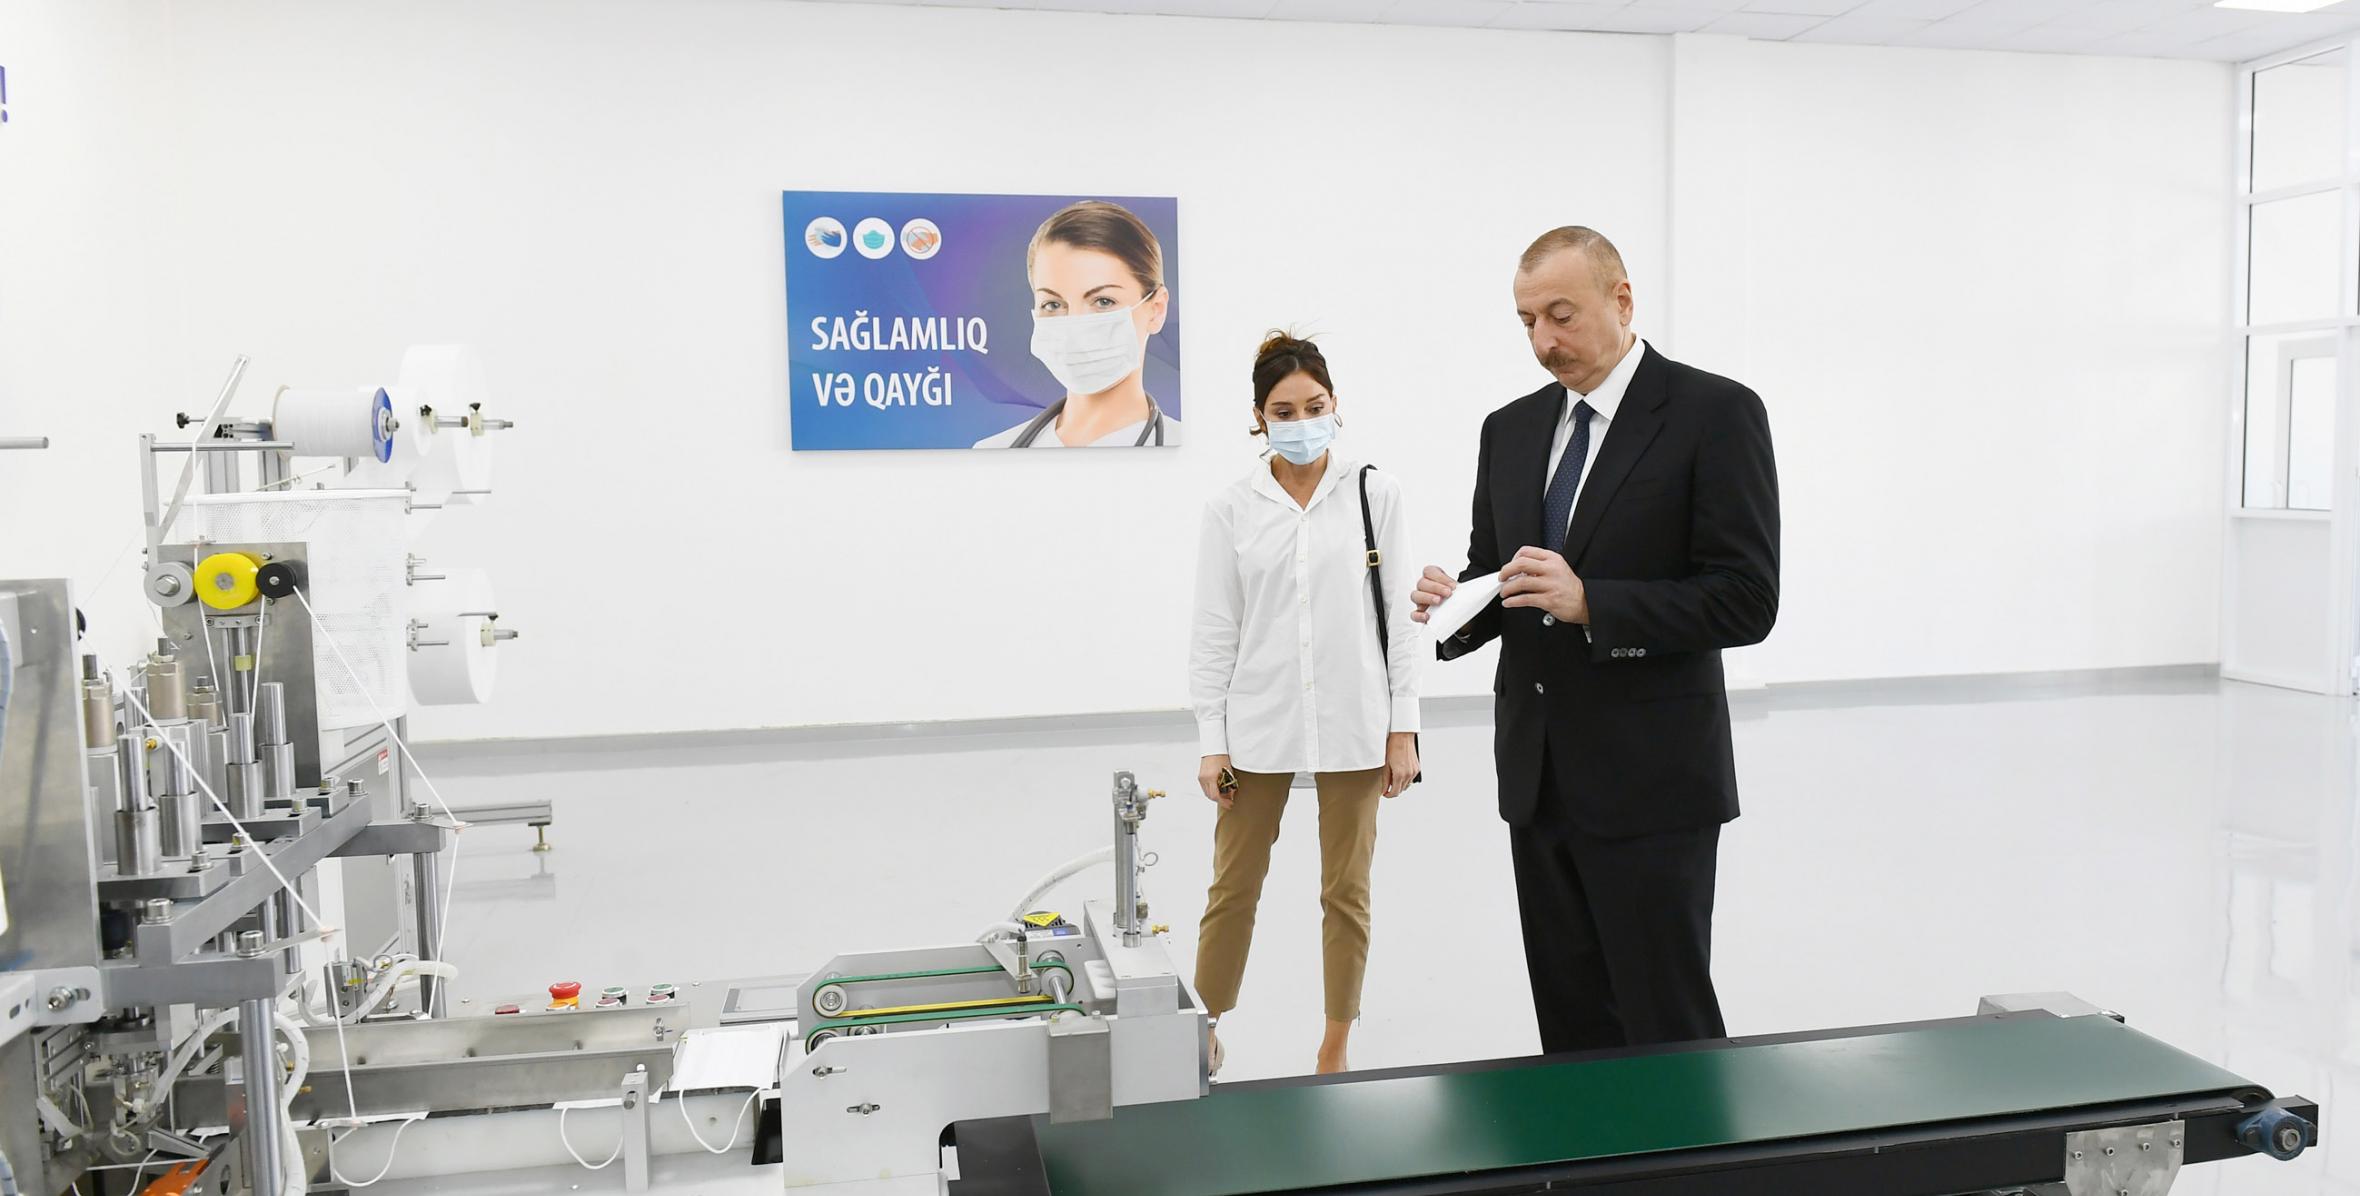 Ilham Aliyev attended opening of face mask factory and protective coverall plant in Sumgayit